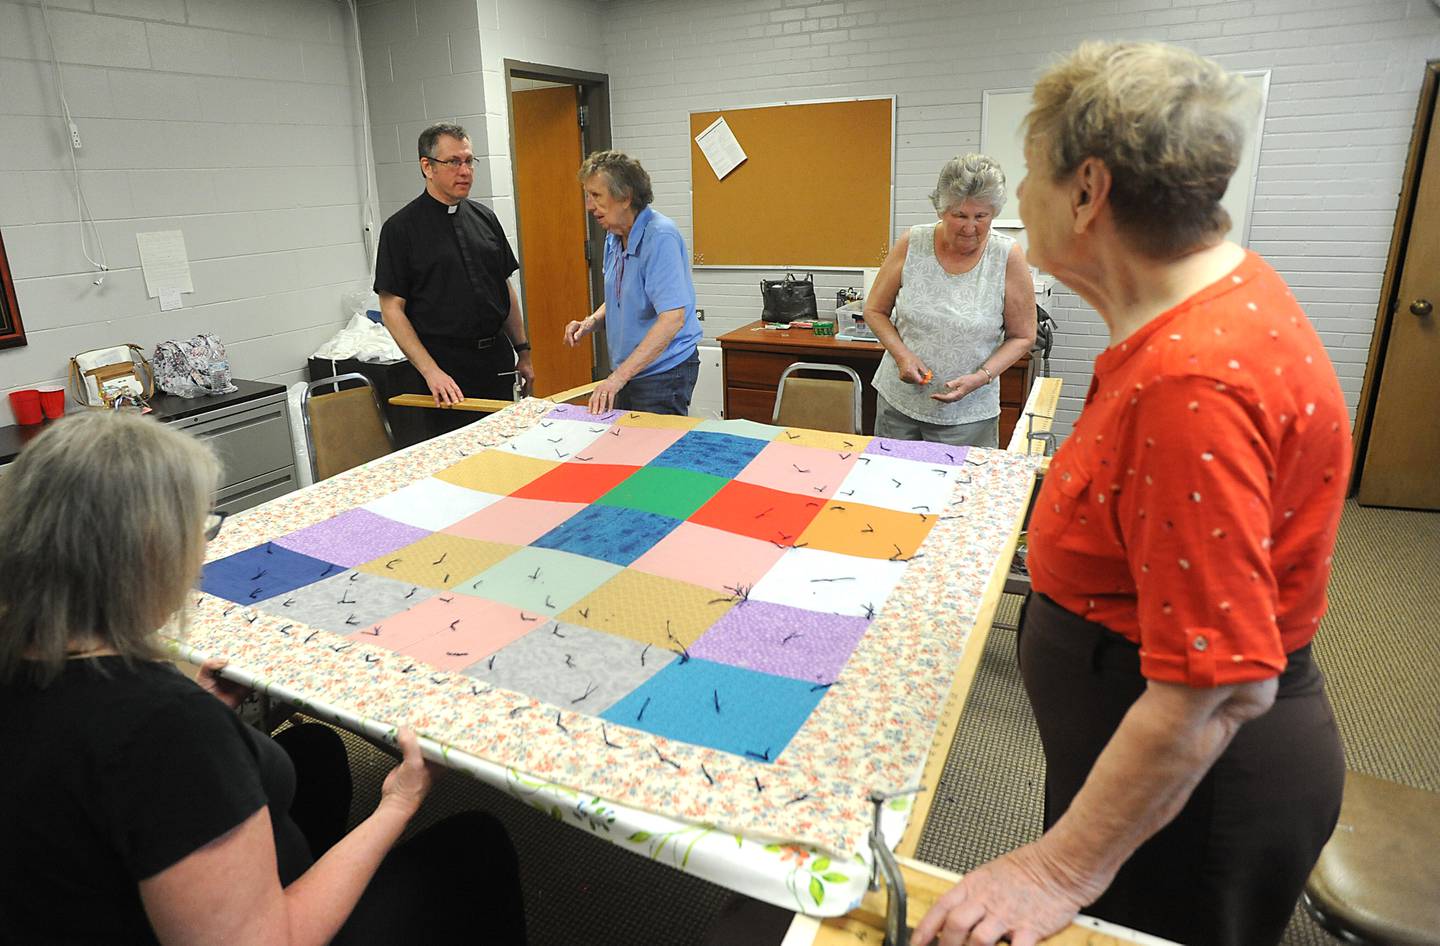 The Rev. Mark Beutow talks with quilters Wednesday, May 11, 2022, as they make a quilt to send to Lutheran World Relief in the basement of Zion Evangelical Lutheran Church and School, 4206 W. Elm St. in McHenry. Since January, with the quilters now able to meet in person again, they have made 11 quilts for people in need.